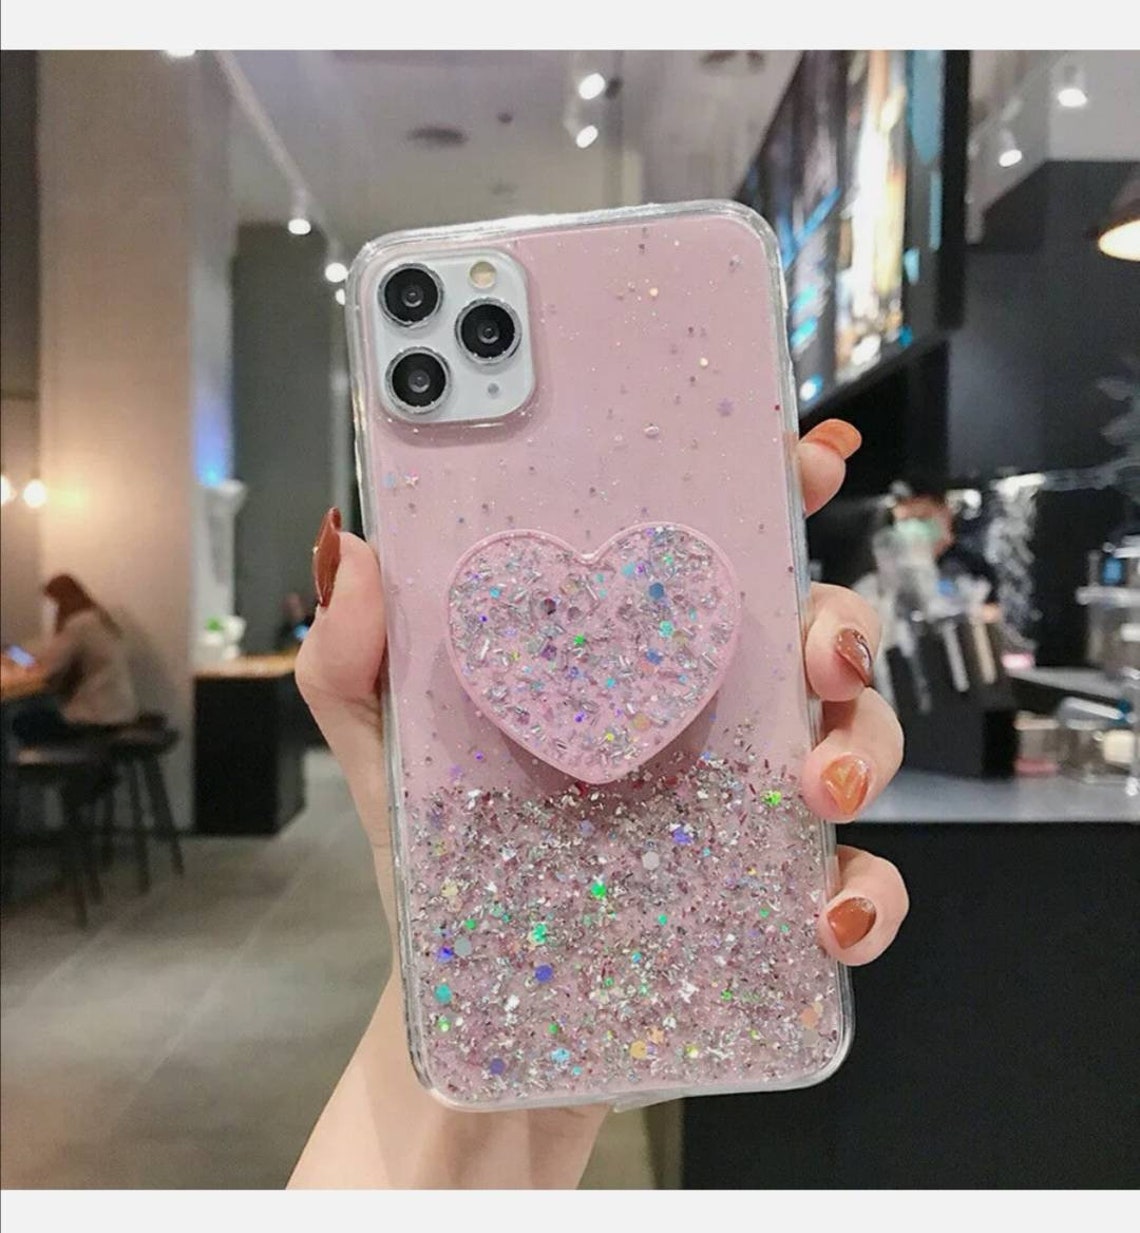 Glitter Phone Case with love heart stand/pop socket | Etsy